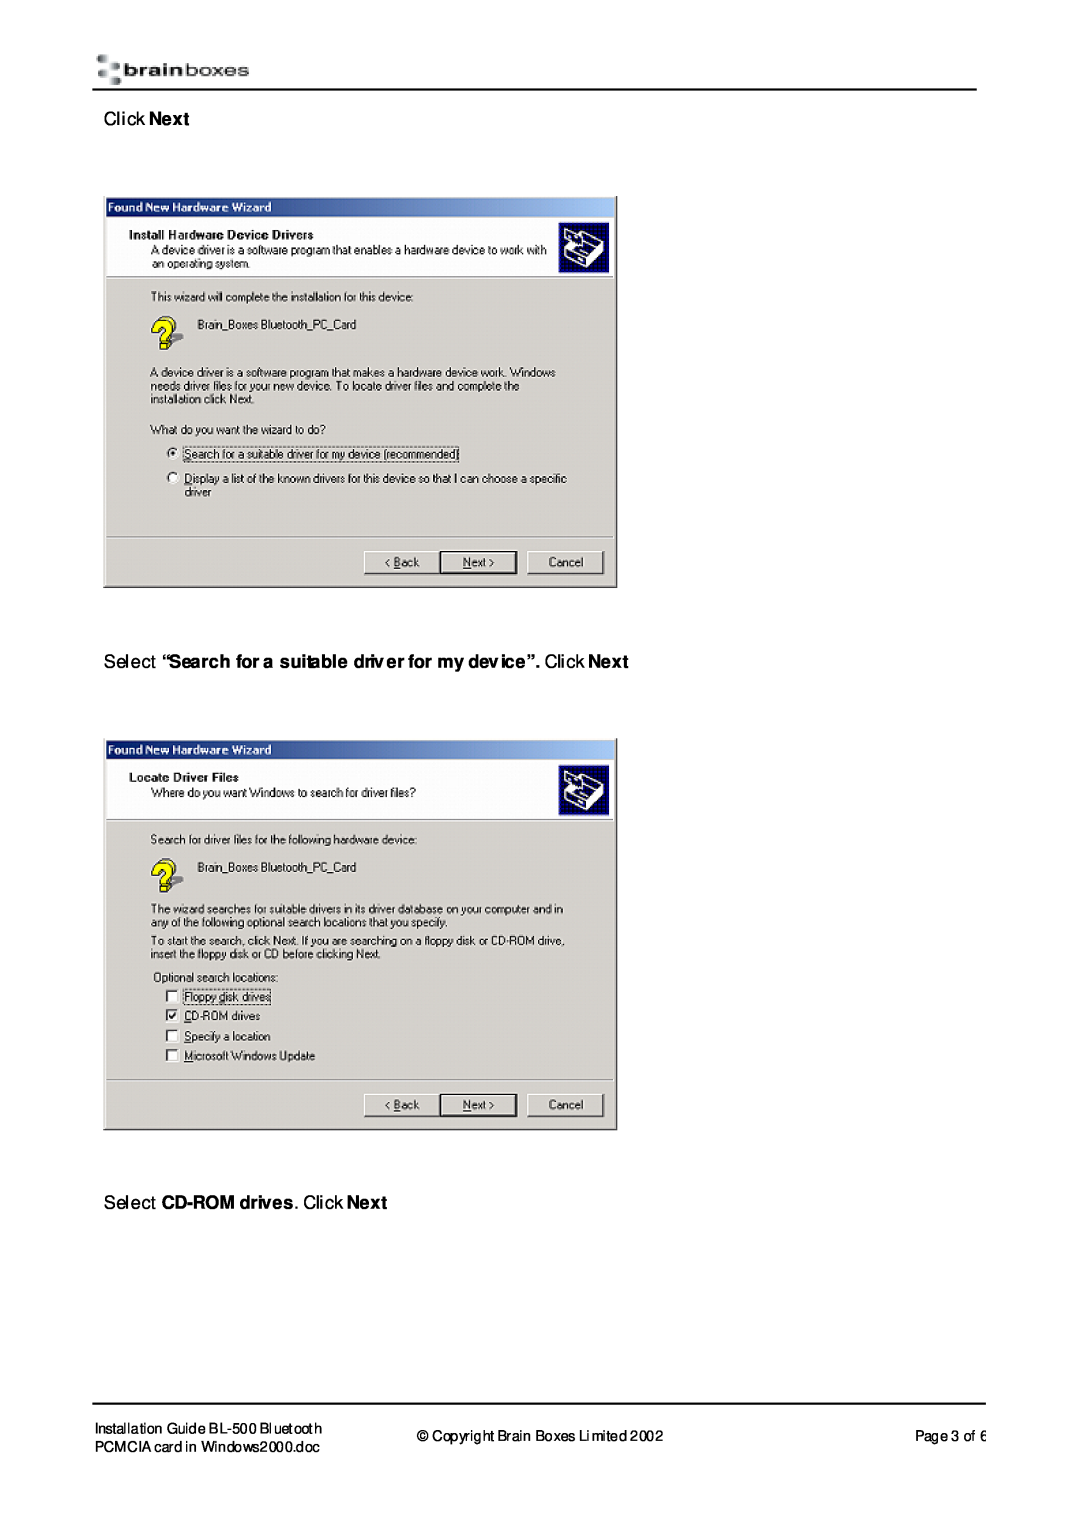 Brainboxes BL-500 manual Select “Search for a suitable driver for my device”. Click Next, Select CD-ROM drives. Click Next 